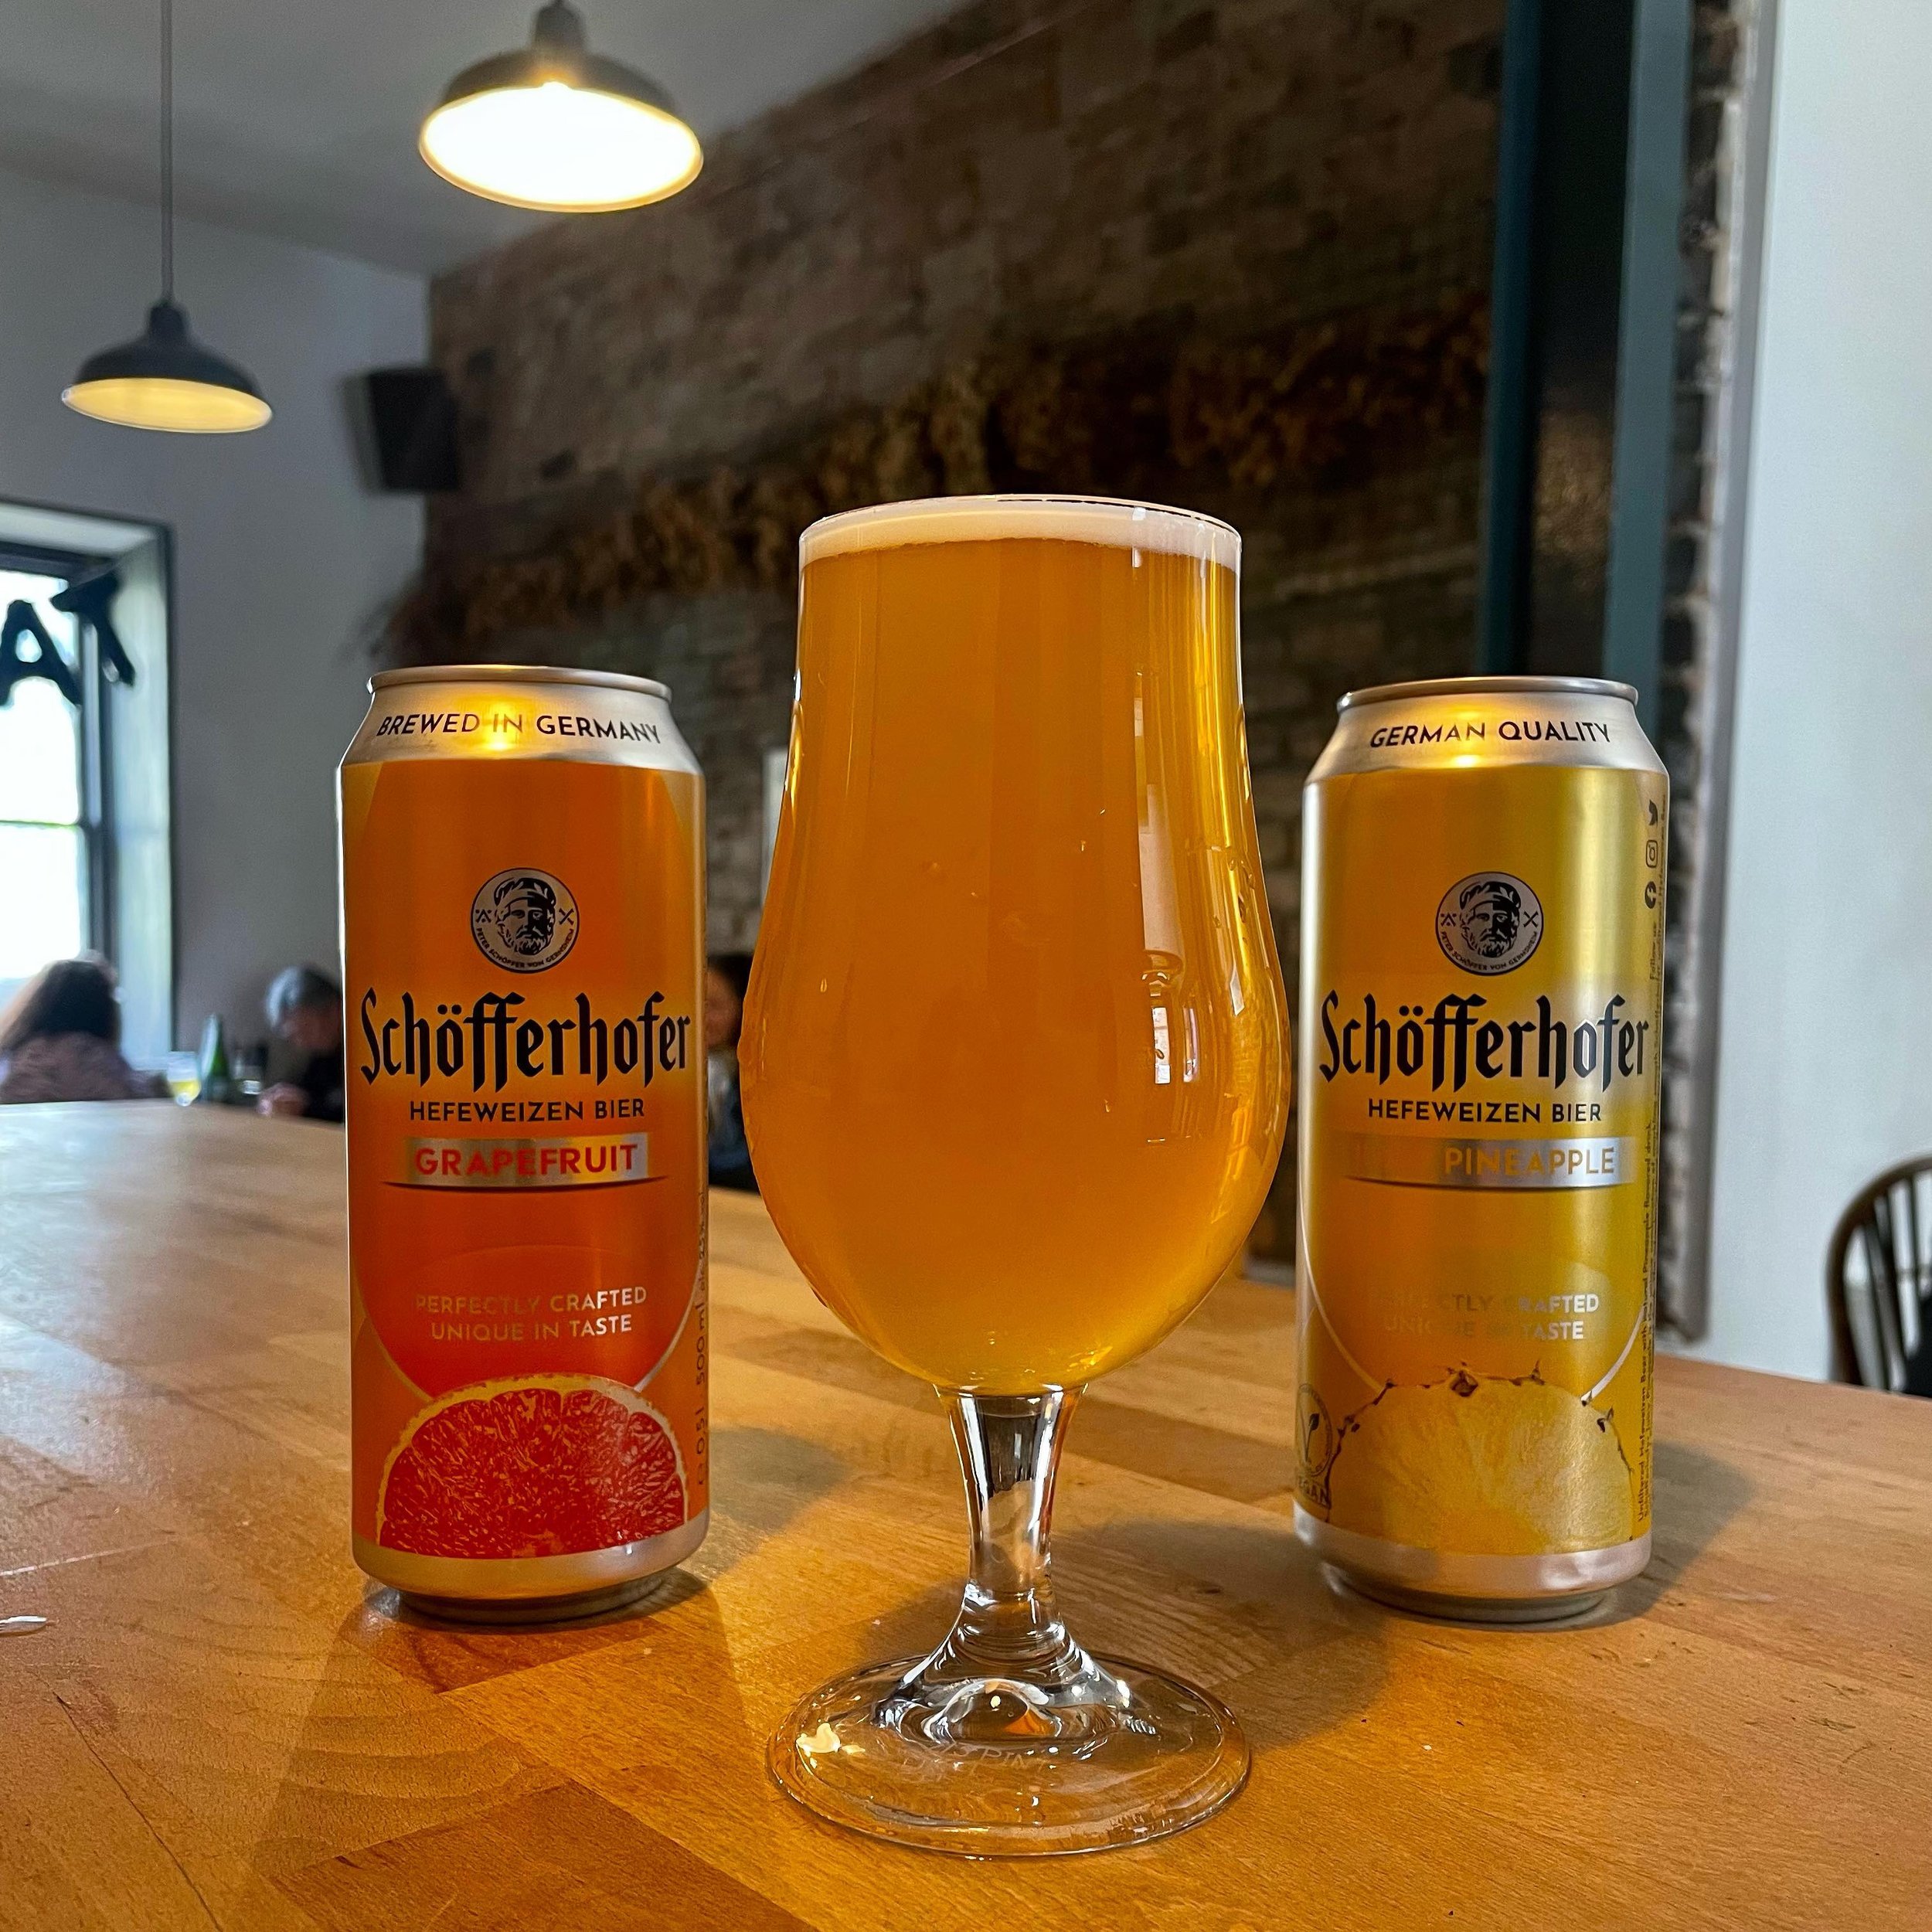 We don&rsquo;t just have @schofferhofer in cans, we&rsquo;ve got it on draft too! Introducing their Prickly Pear radler to our draft list, in stocks till I finish the keg cause this thing is DELICIOUS 🍺🙌😋